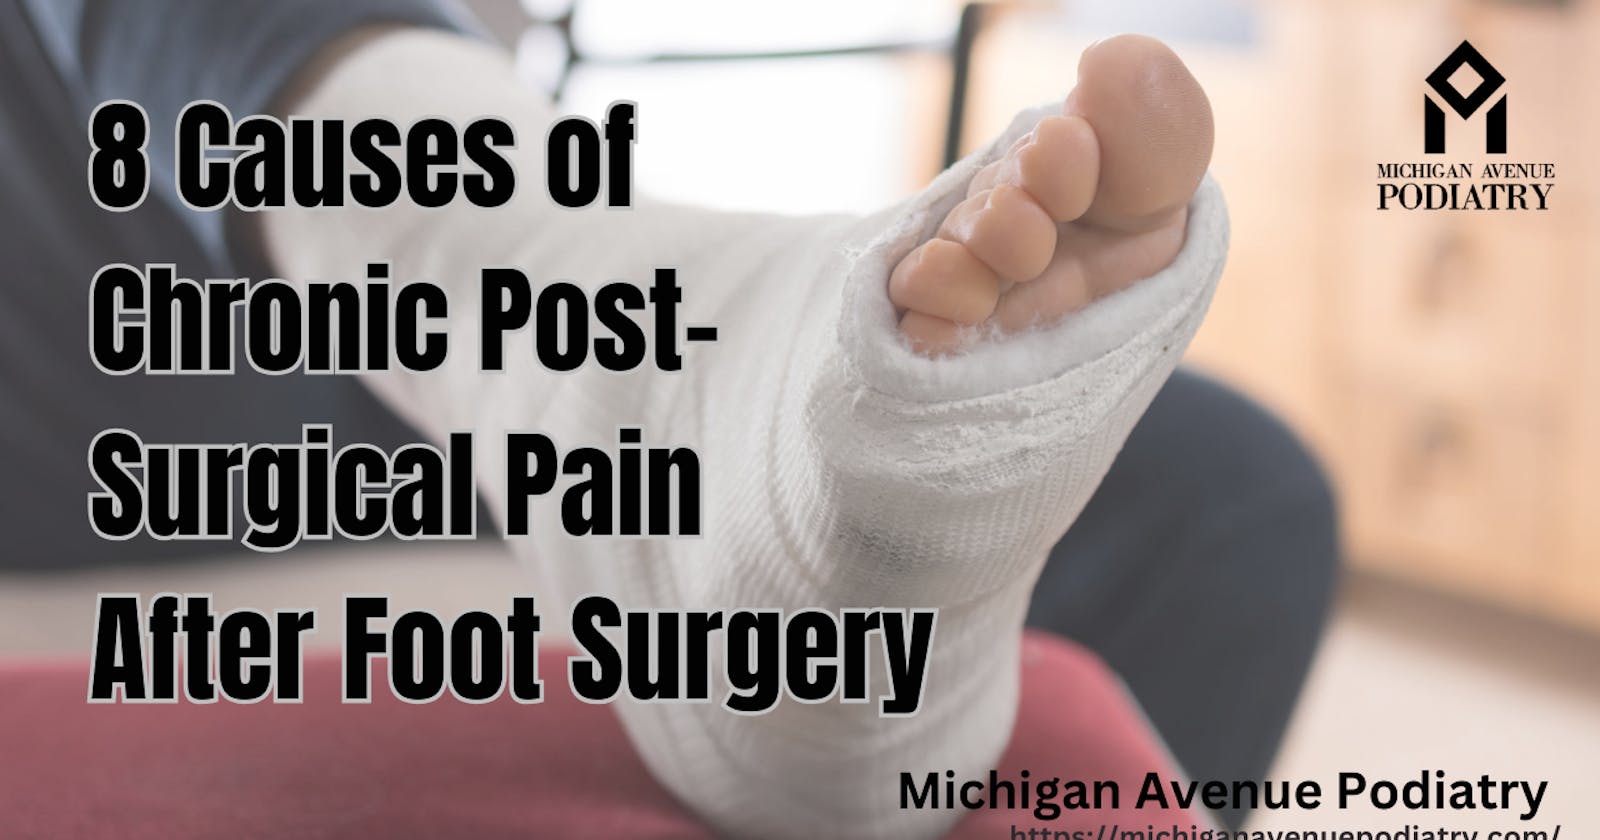 8 Causes of Chronic Post-Surgical Foot Pain After Surgery